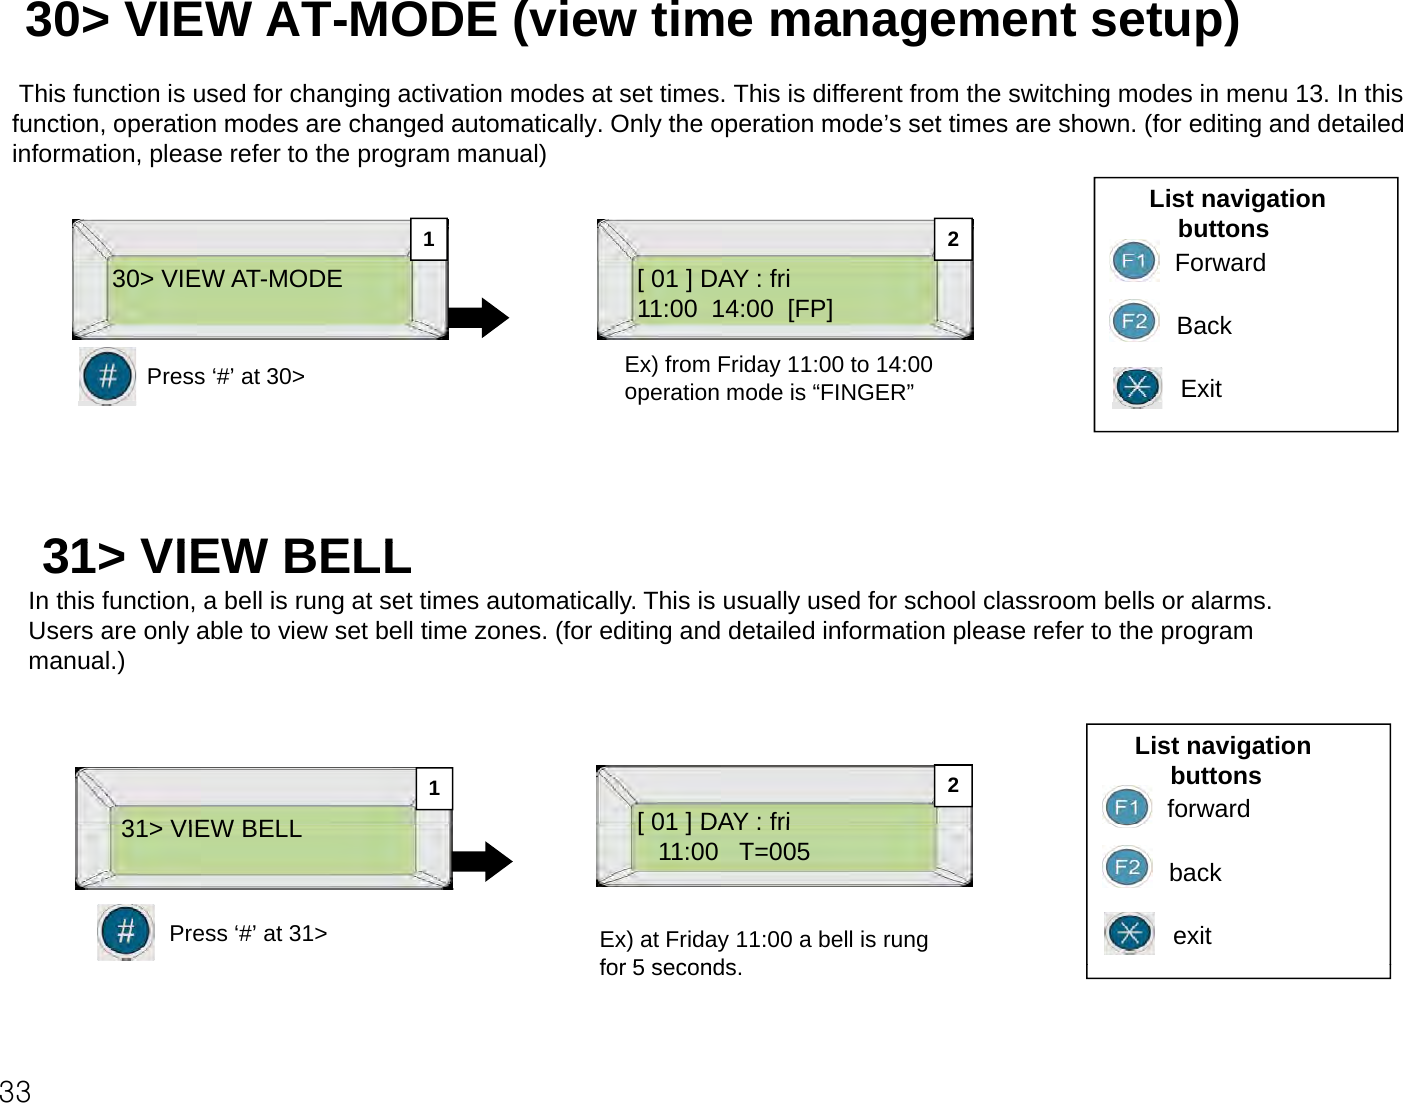 30&gt; VIEW AT-MODE (view time management setup)This function is used for changing activation modes at set times. This is different from the switching modes in menu 13. In this function operation modes are changed automatically Only the operation mode’s set times are shown (for editing and detailedfunction, operation modes are changed automatically. Only the operation mode s set times are shown. (for editing and detailedinformation, please refer to the program manual)  List navigation buttonsForward1 230&gt; VIEW AT-MODE [ 01 ] DAY : fri11:00  14:00  [FP]ForwardBackExitEx) from Friday 11:00 to 14:00 operation mode is “FINGER”Press ‘#’ at 30&gt;p31&gt; VIEW BELL31&gt; VIEW BELL In this function, a bell is rung at set times automatically. This is usually used for school classroom bells or alarms. Users are only able to view set bell time zones. (for editing and detailed information please refer to the program manual.)31&gt; VIEW BELL[01]DAY:friList navigation buttonsforward21Press ‘#’ at 31&gt;31&gt; VIEW BELL[ 01 ] DAY : fri11:00   T=005Ex) at Friday 11:00 a bell is rung for 5 secondsbackexit33for 5 seconds. 